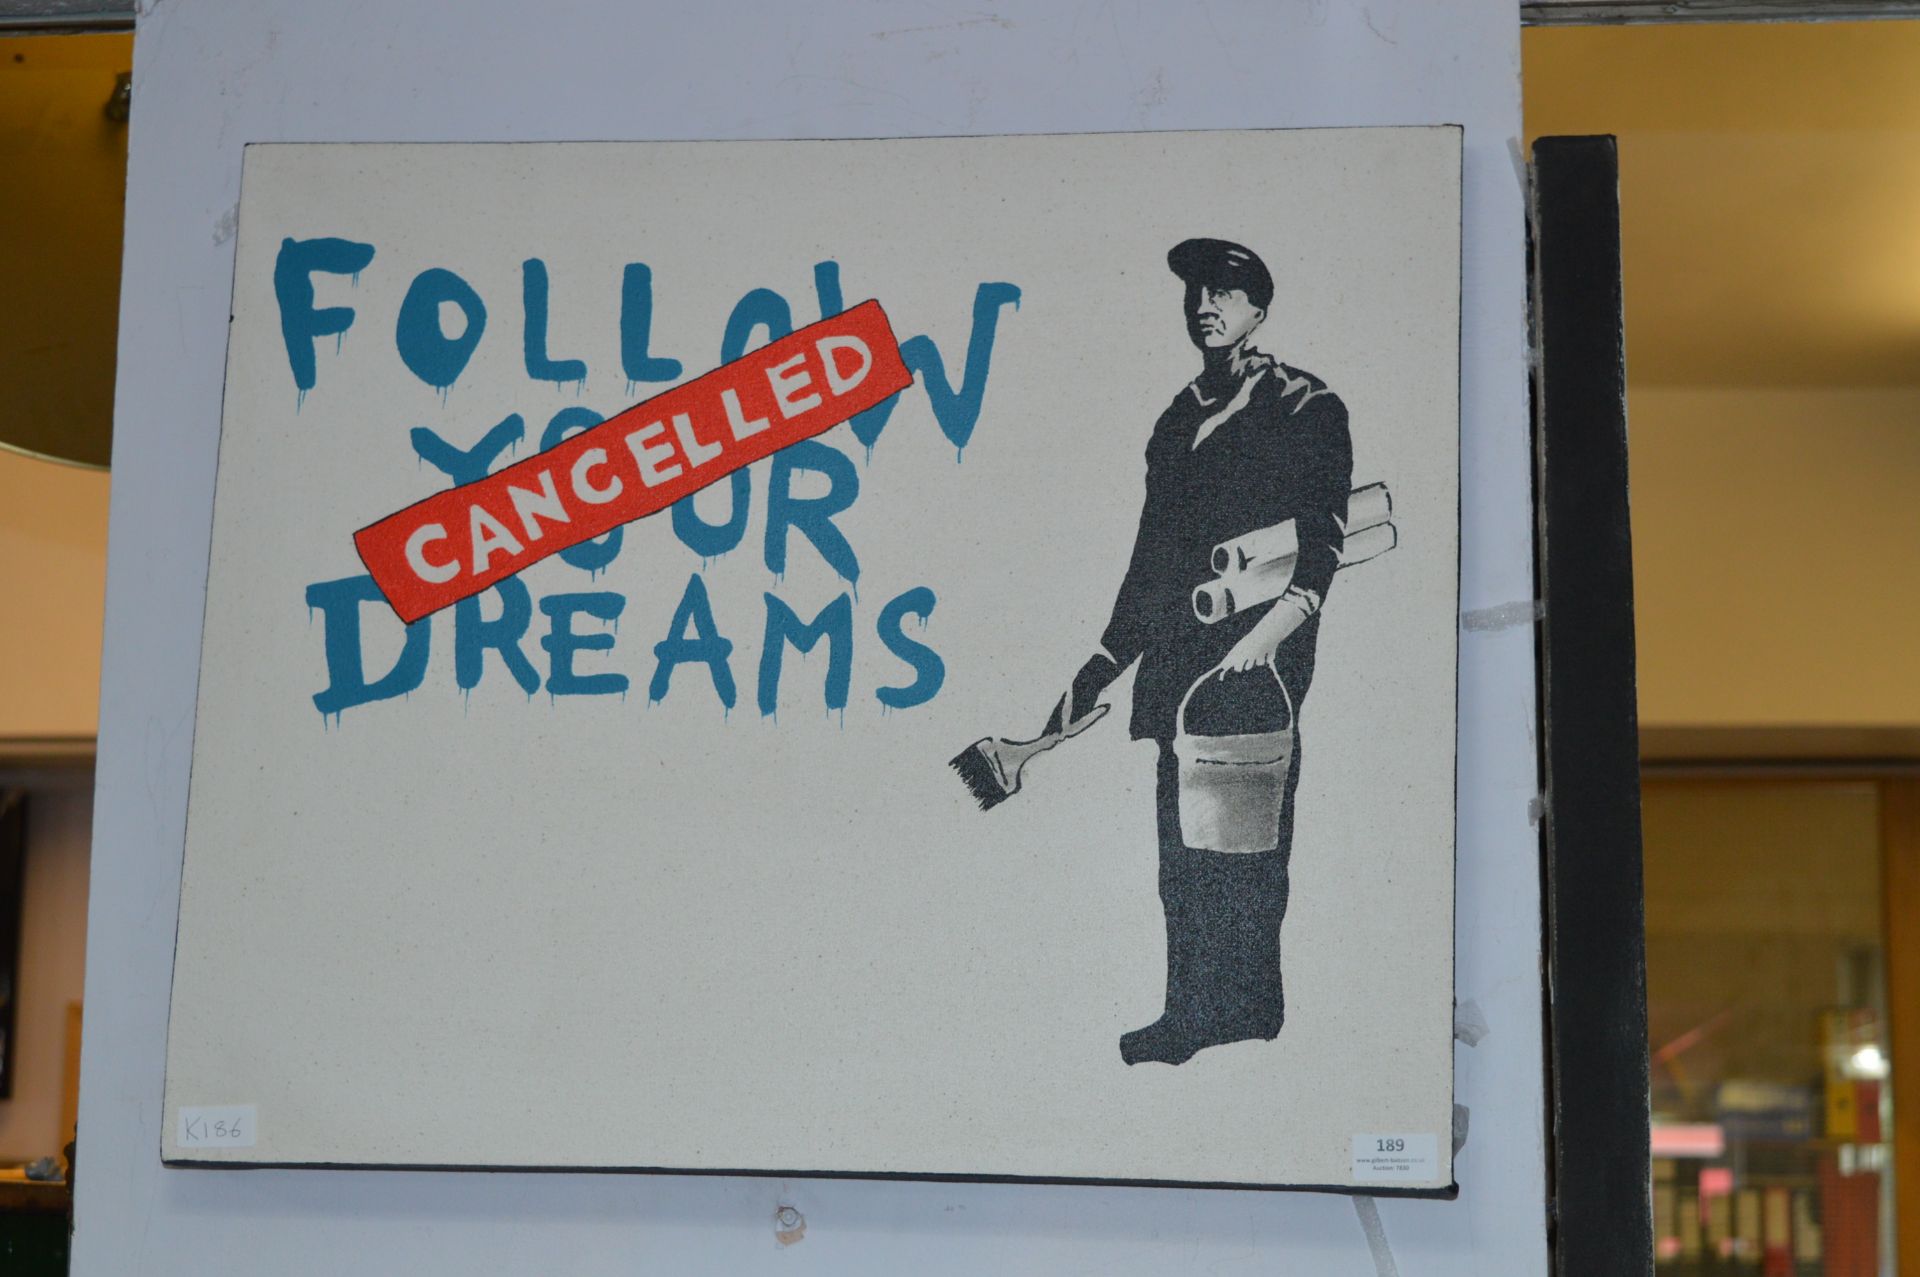 Banksy Painting on Canvas "Follow Your Dreams"